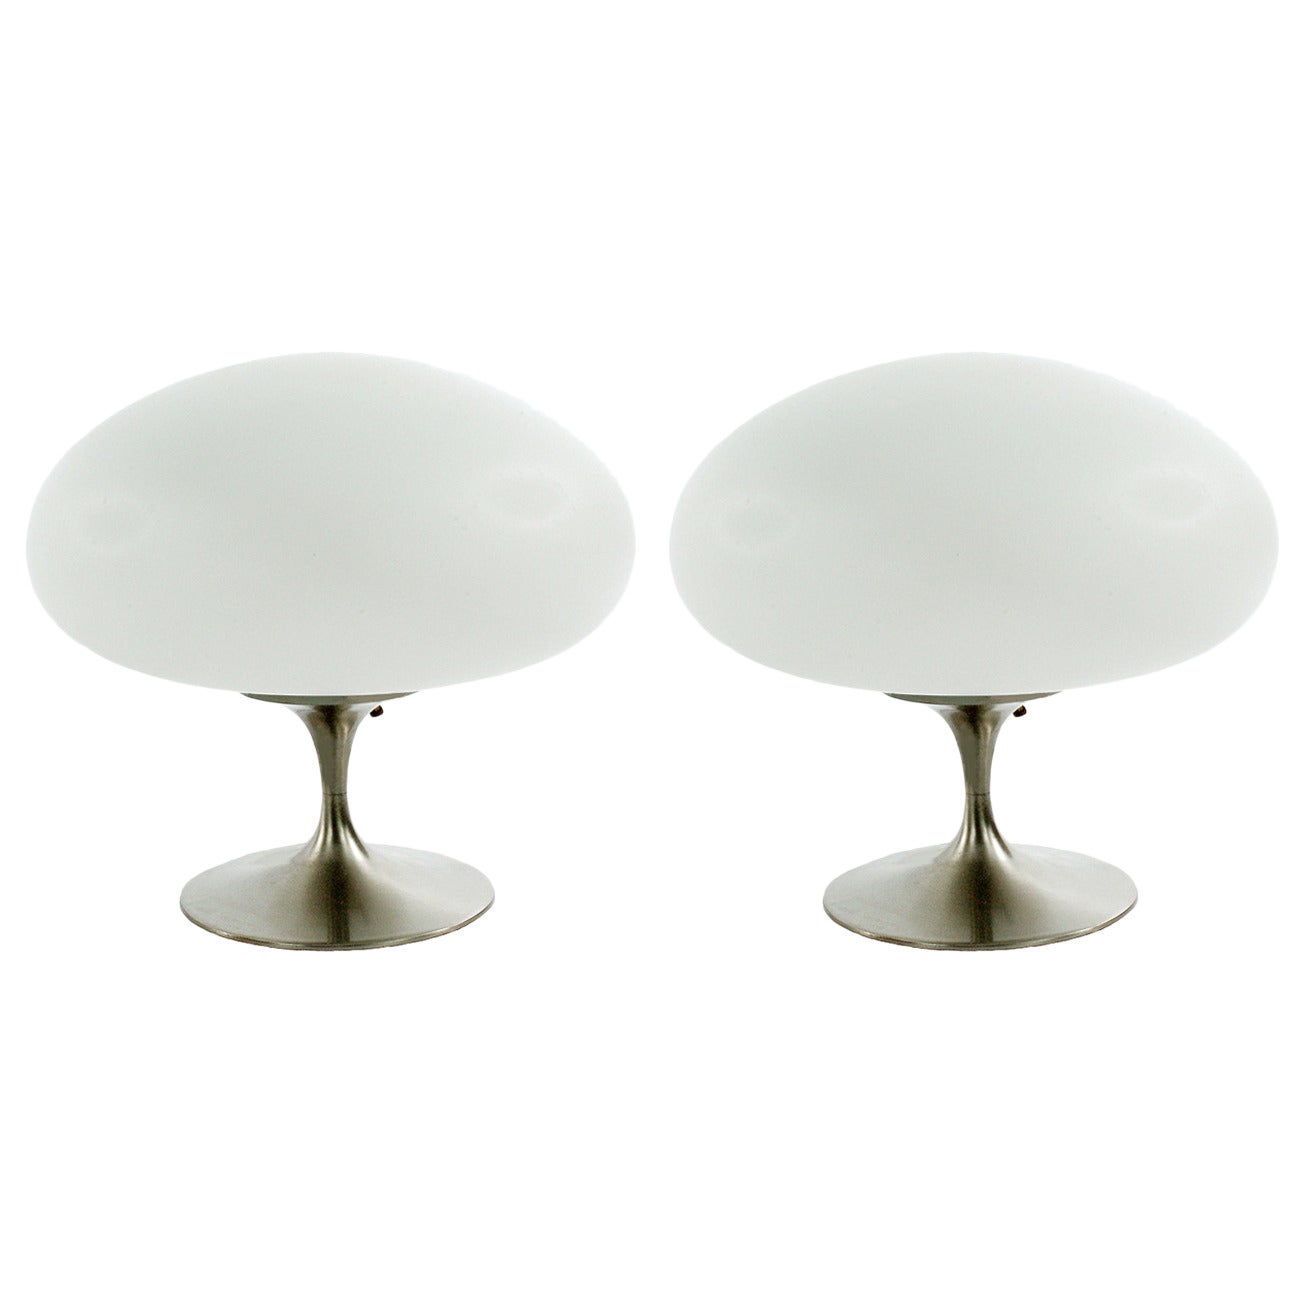 Matching Pair of Mushroom Table Lamps by Laurel Lamp Co.